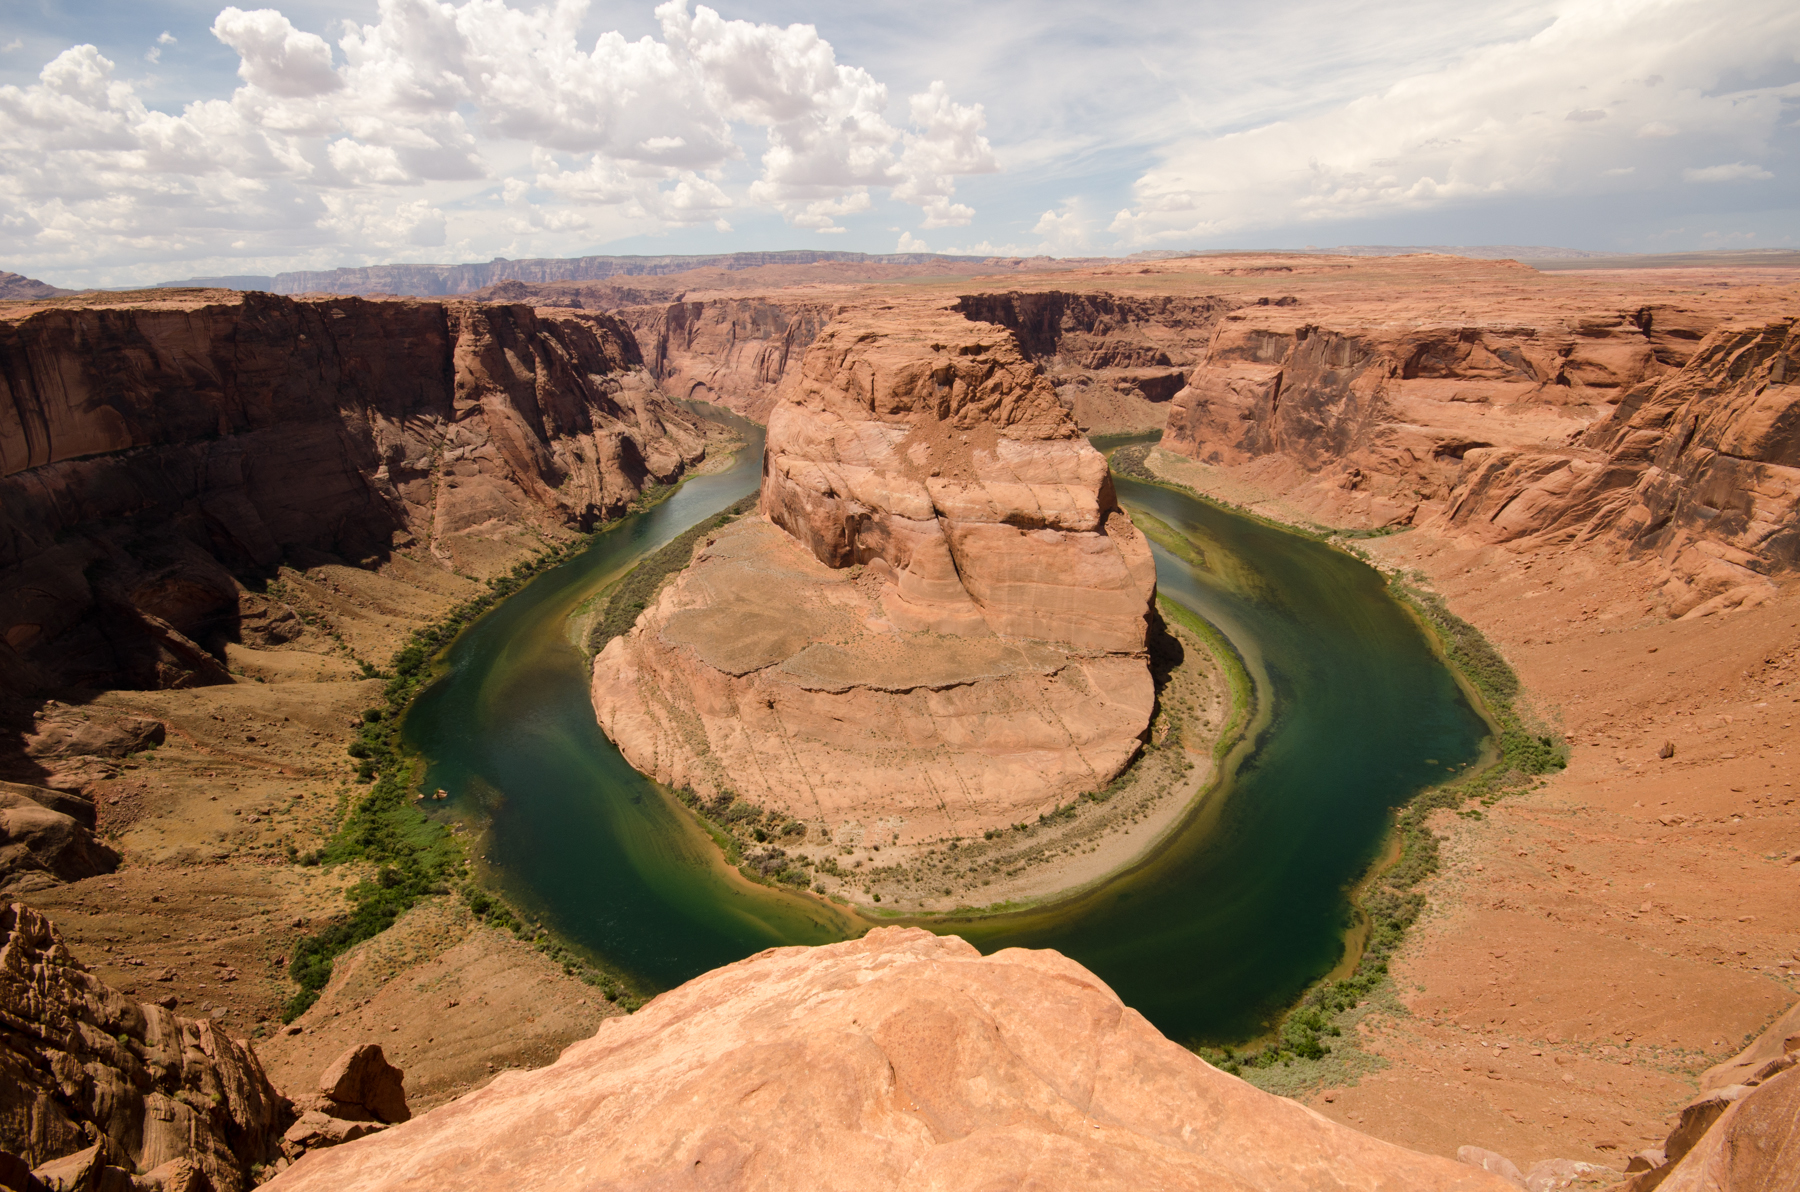 Horseshoe Bend in Arizona: no fences and just a sheer drop into the Colorado River. Frightening to watch people take photos of their toddlers standing right on the edge.